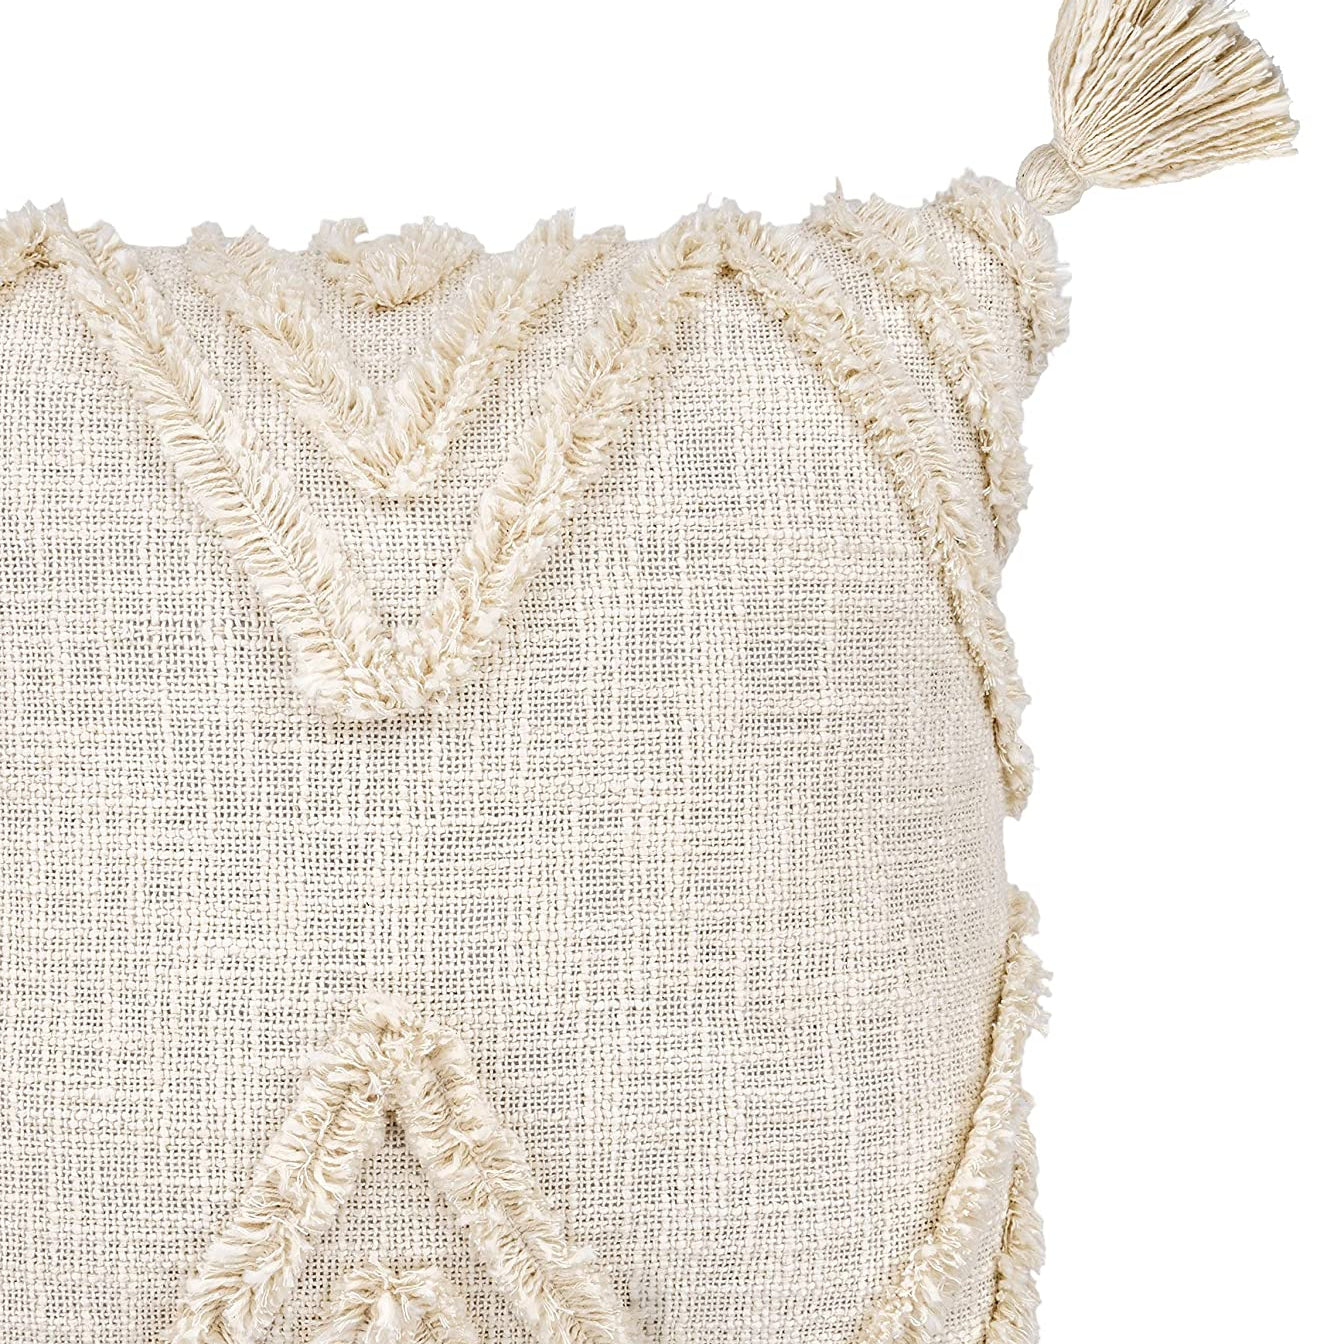 'Ivory Coast' Hand-Woven Cotton Wool Cushion Cover